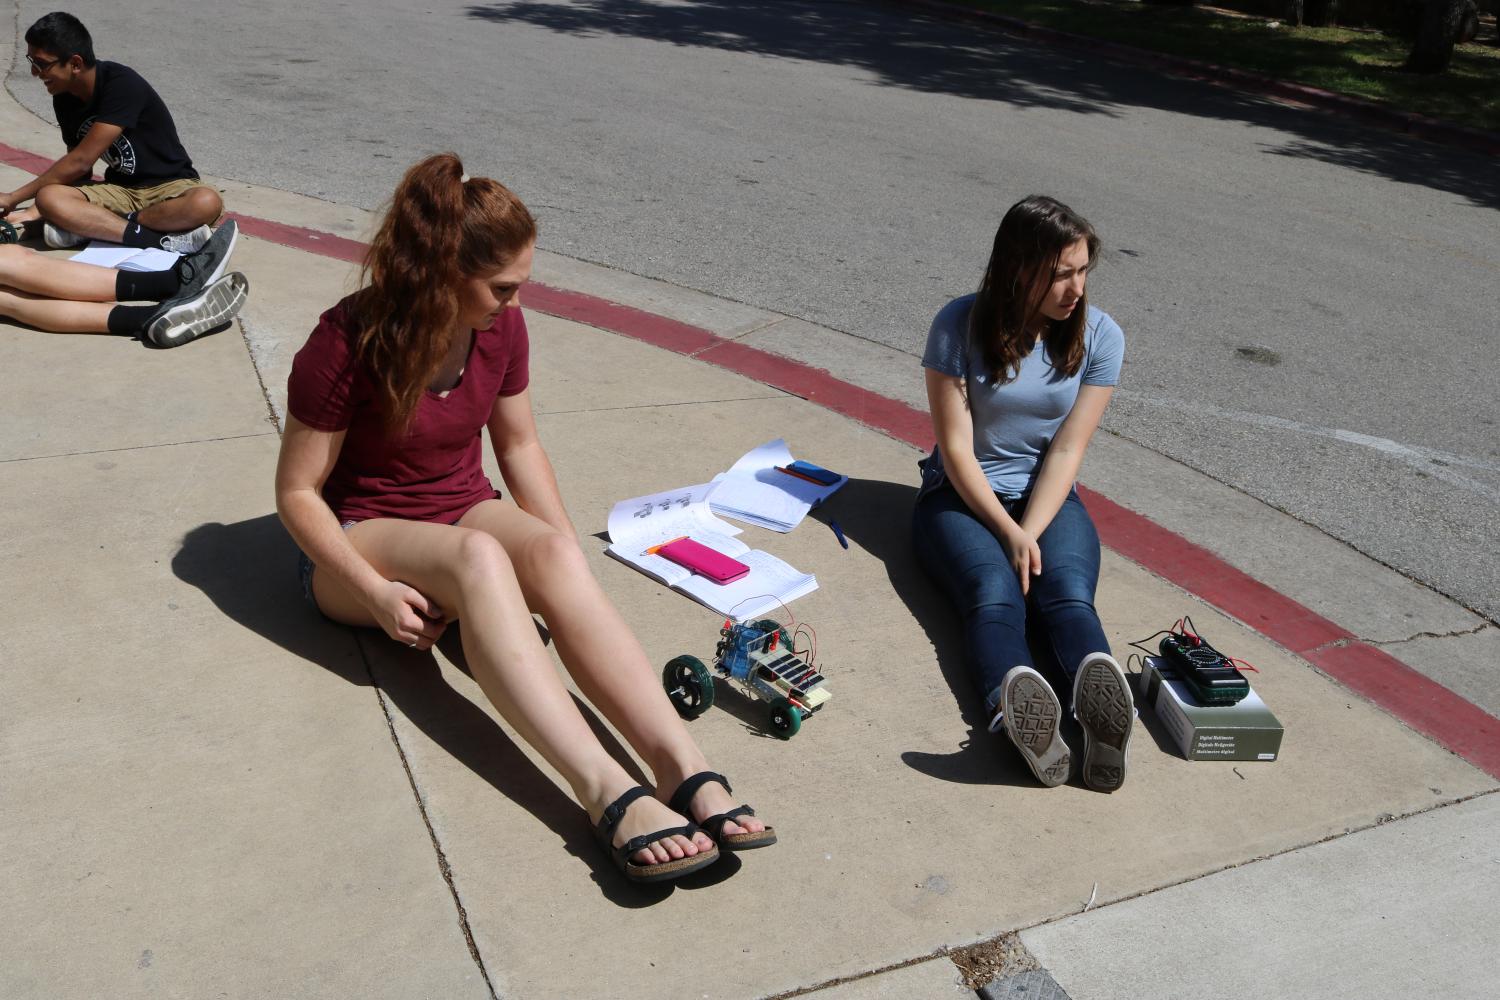 Seanne Bouy 19 and Ashlyn Hill 17 wait for their fuel cell to charge. 